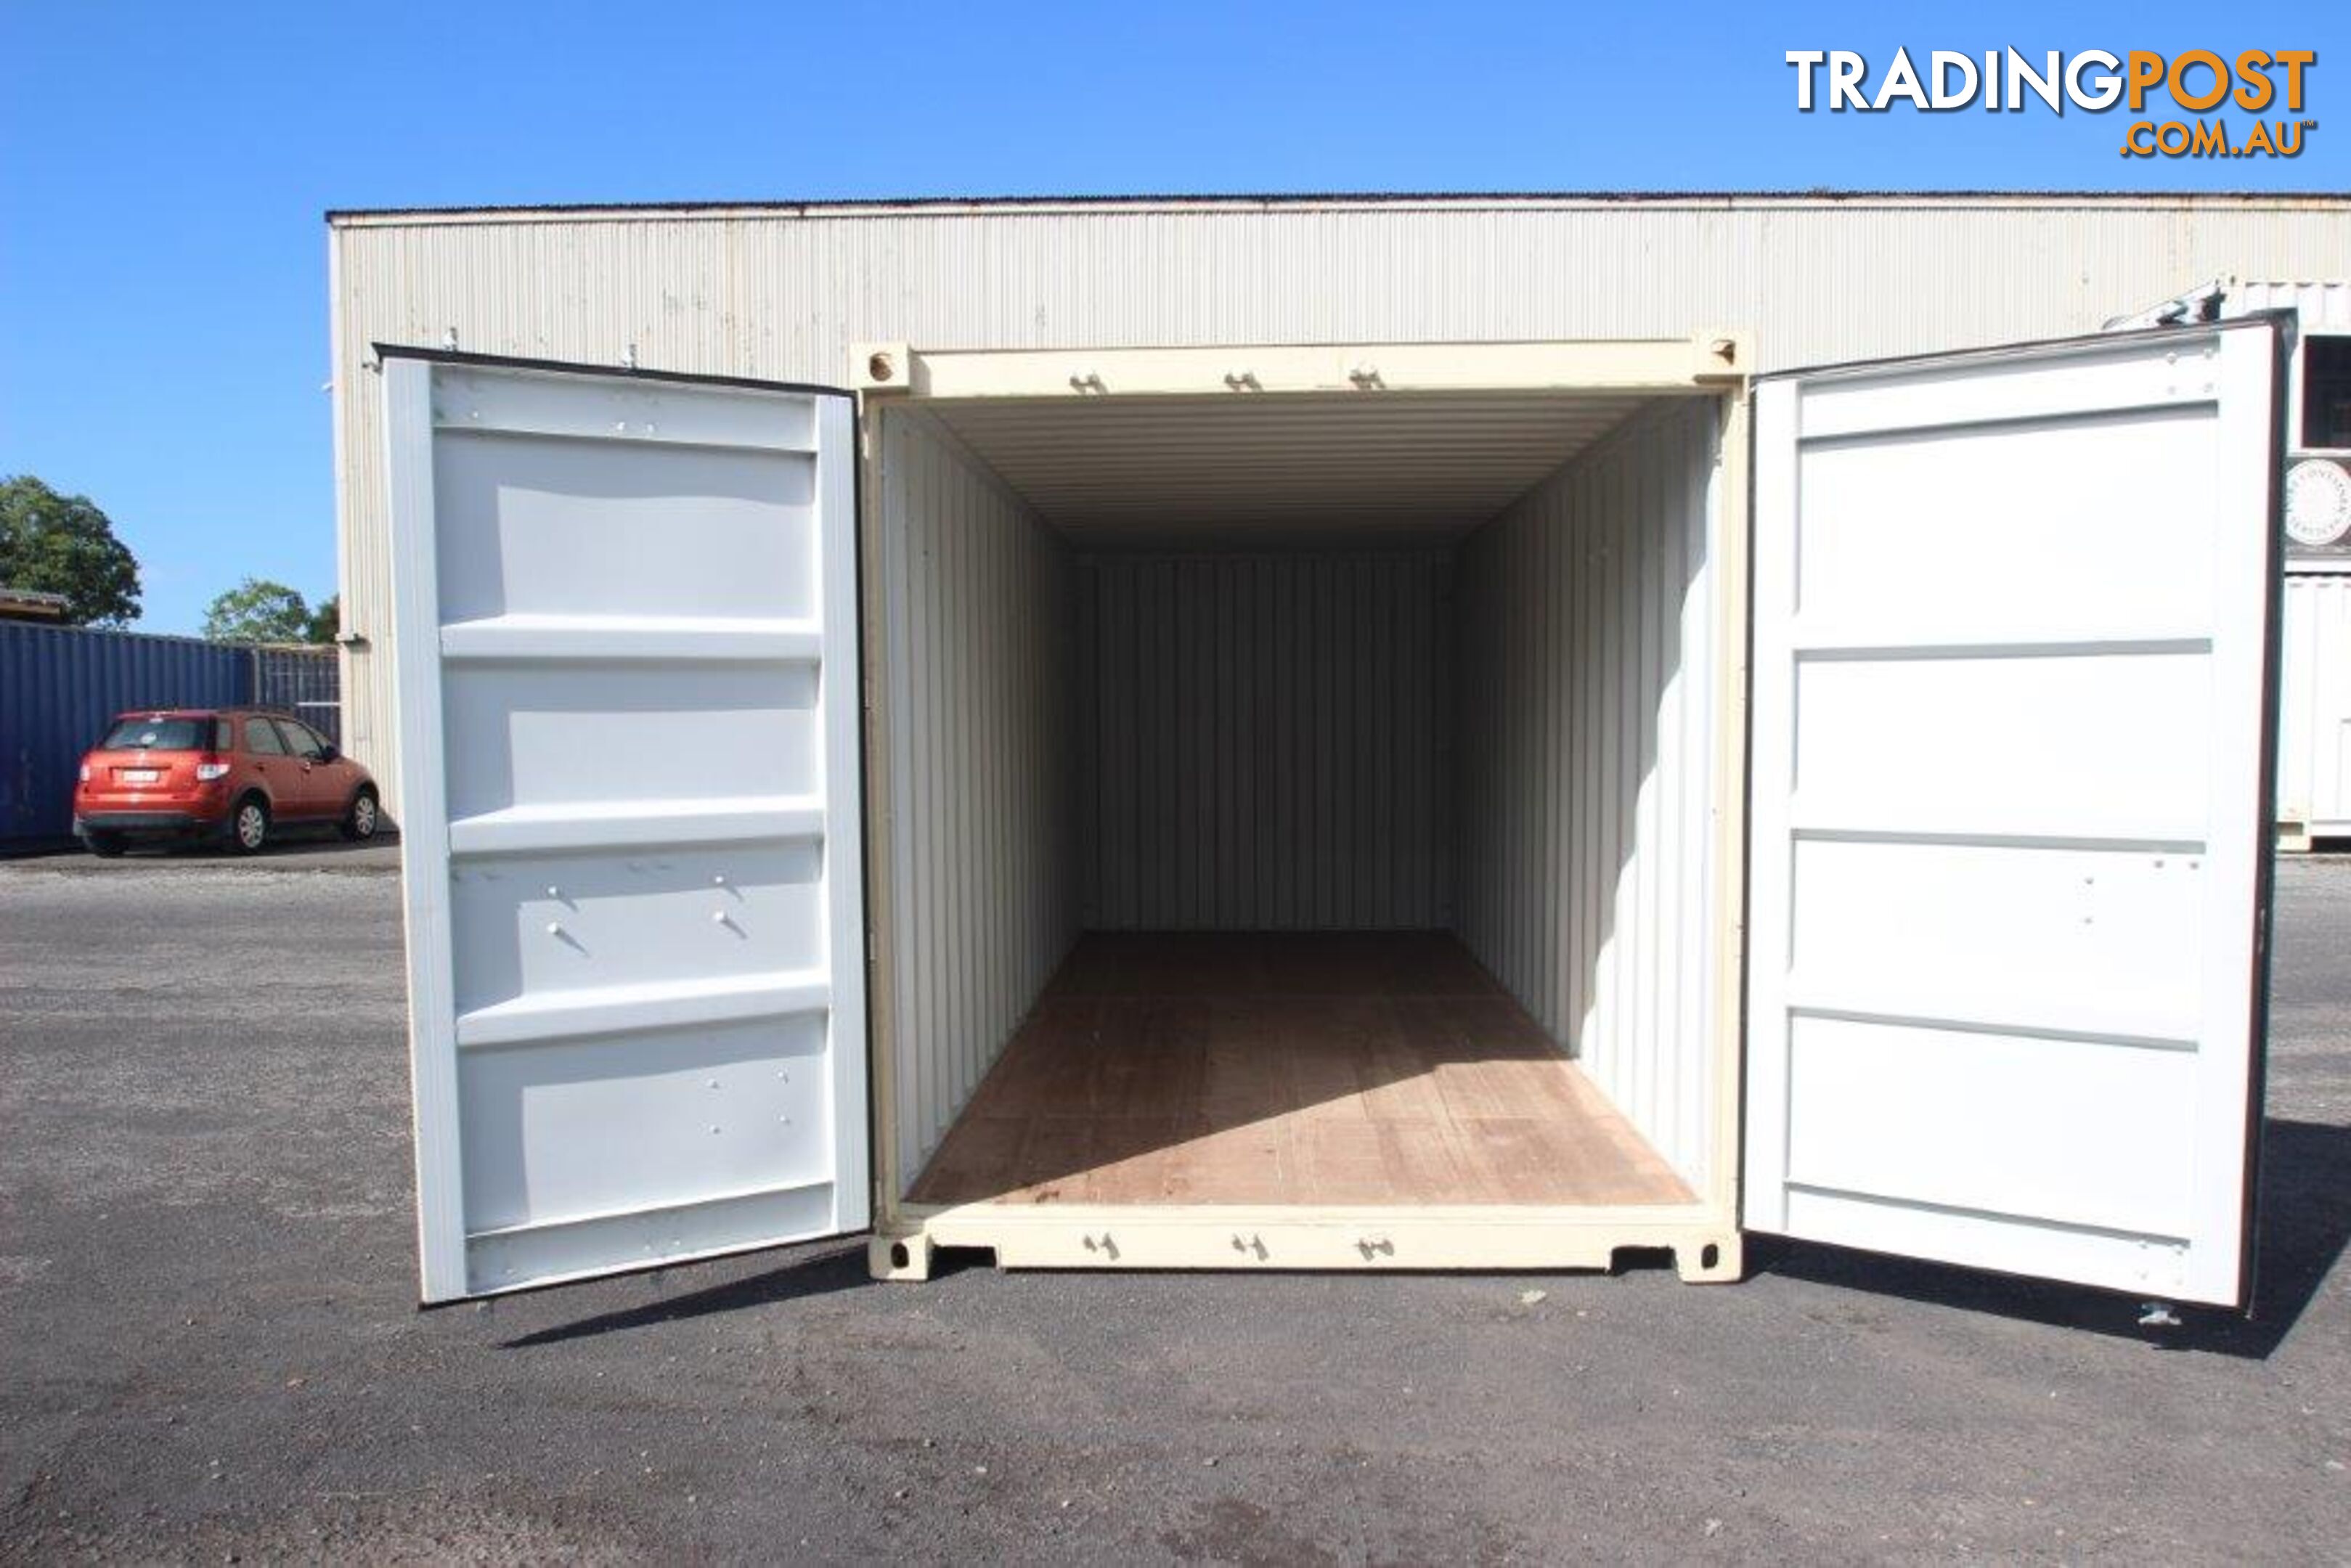 New 20ft Shipping Containers Port Pirie - From $6500 + GST